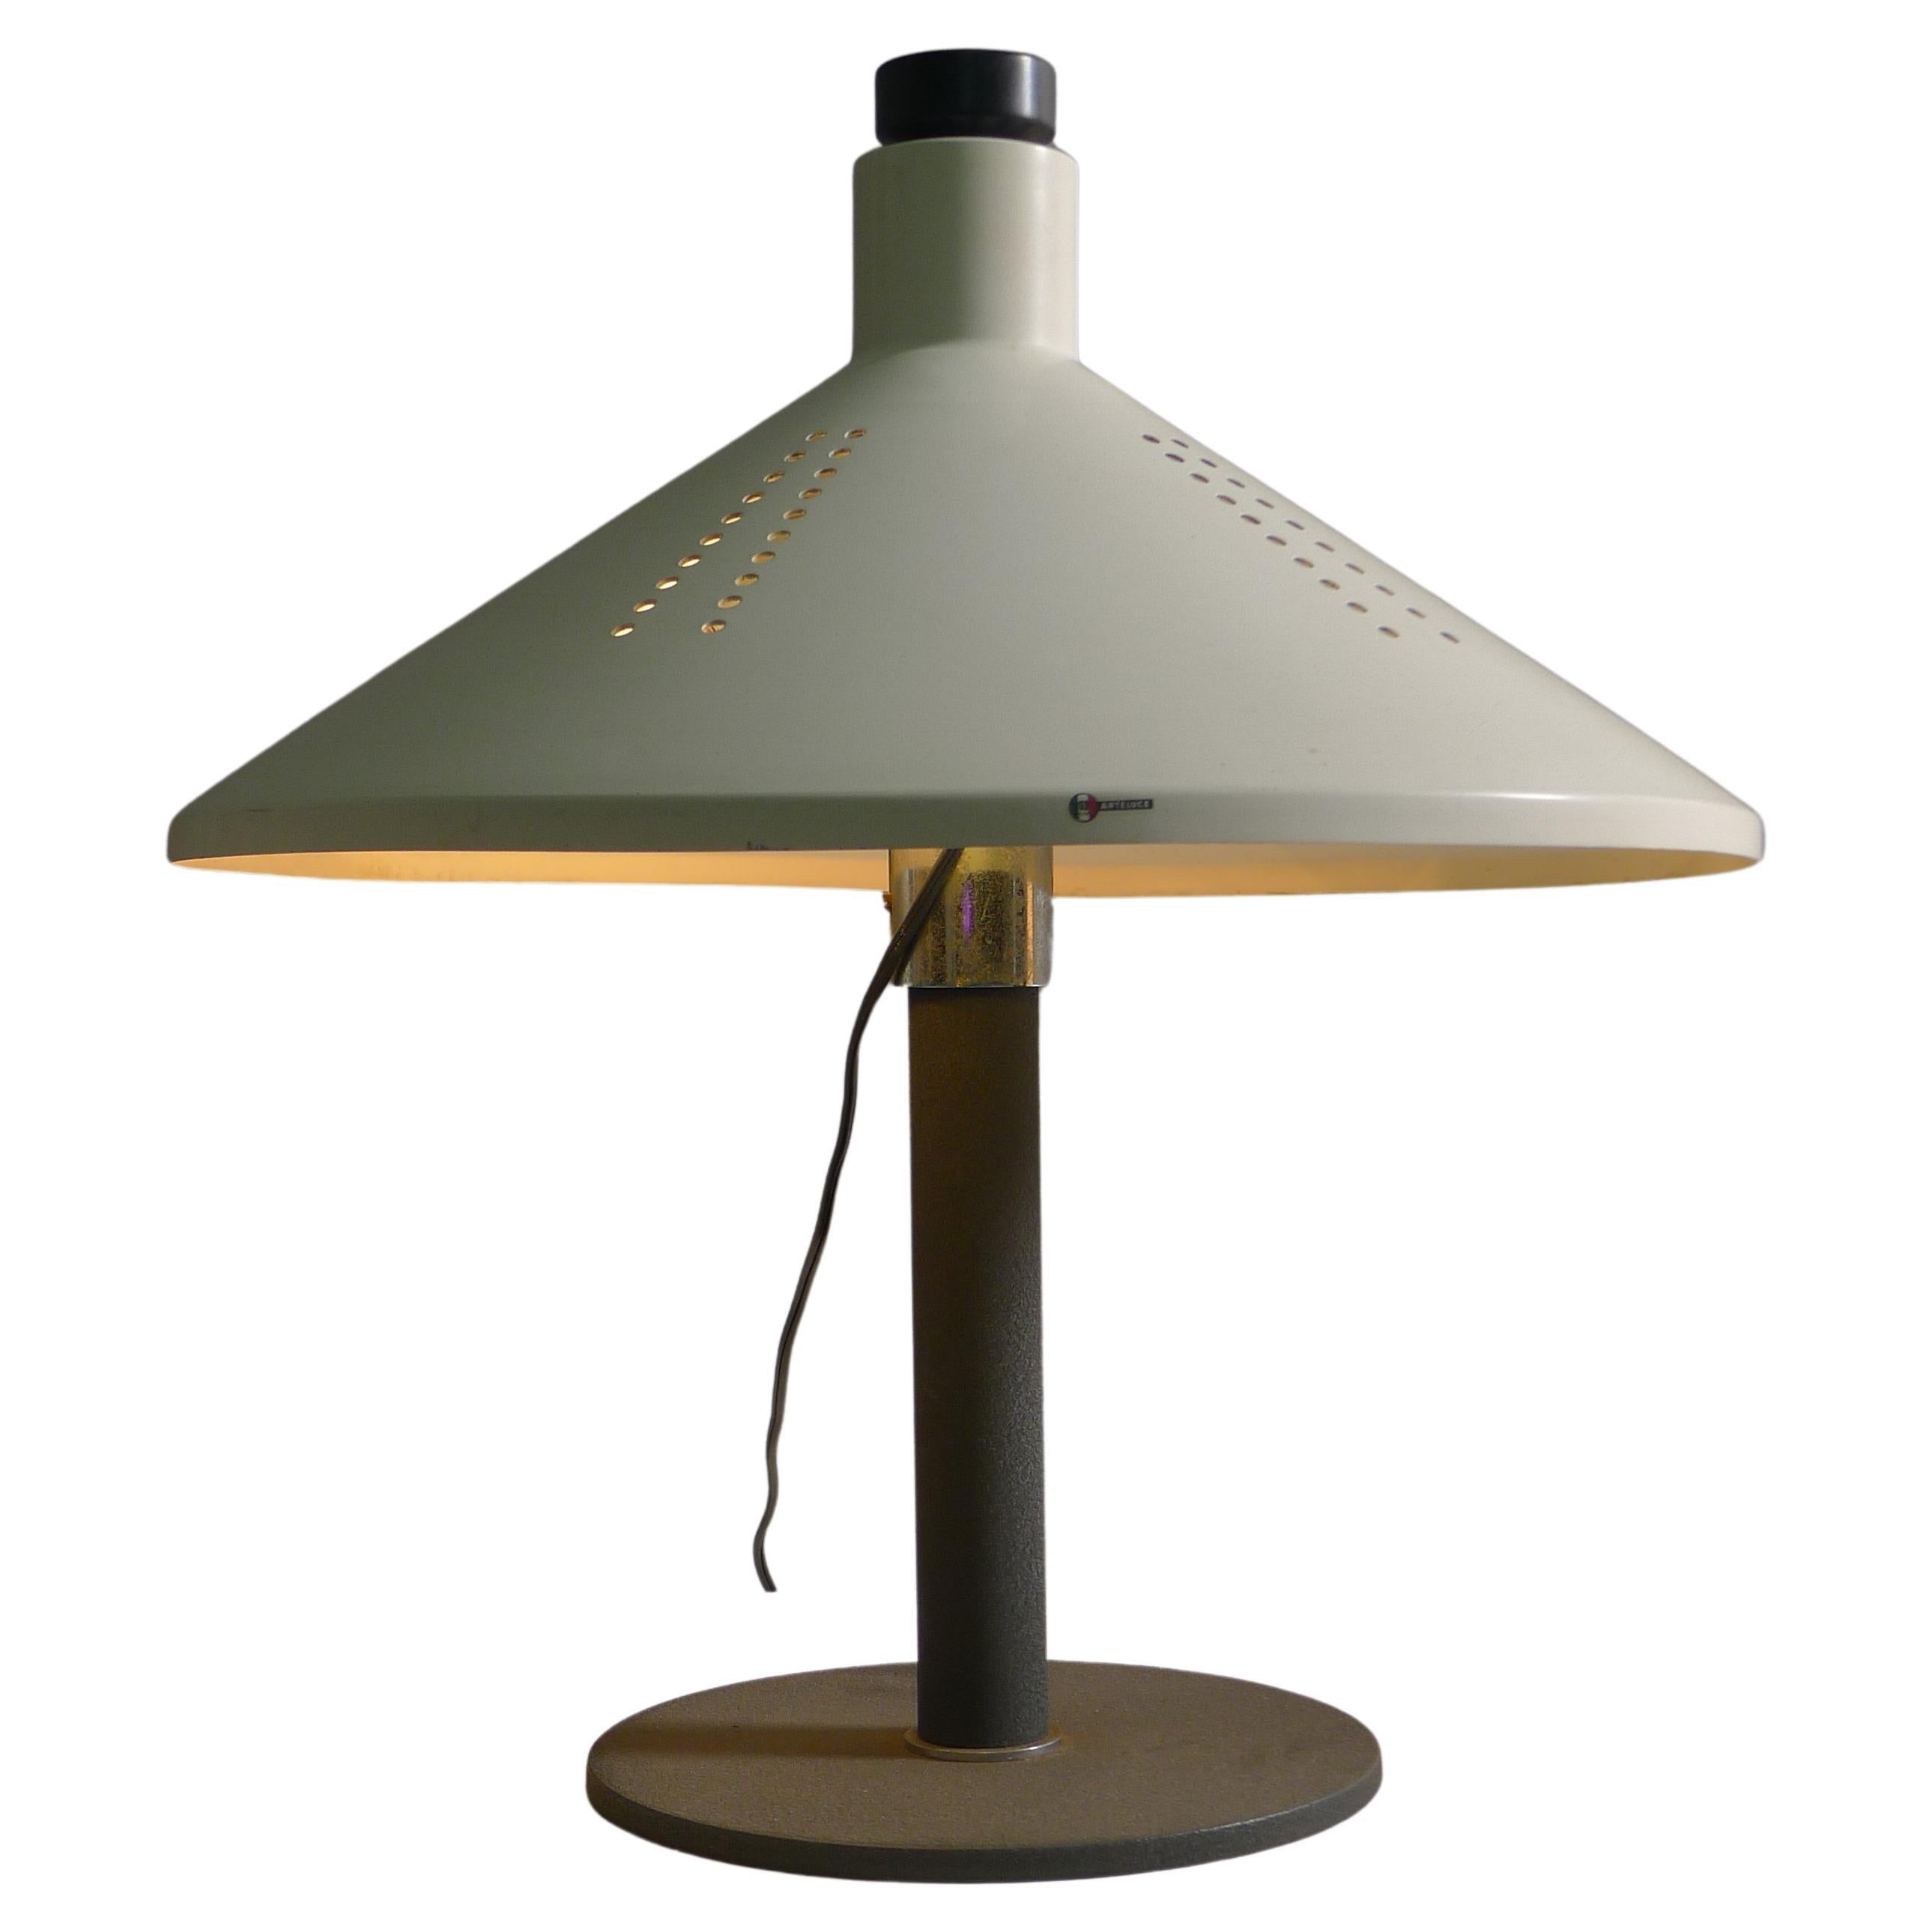 Gino Sarfatti for Arteluce, Italy, Model 609 Table Lamp from 1973, Labelled